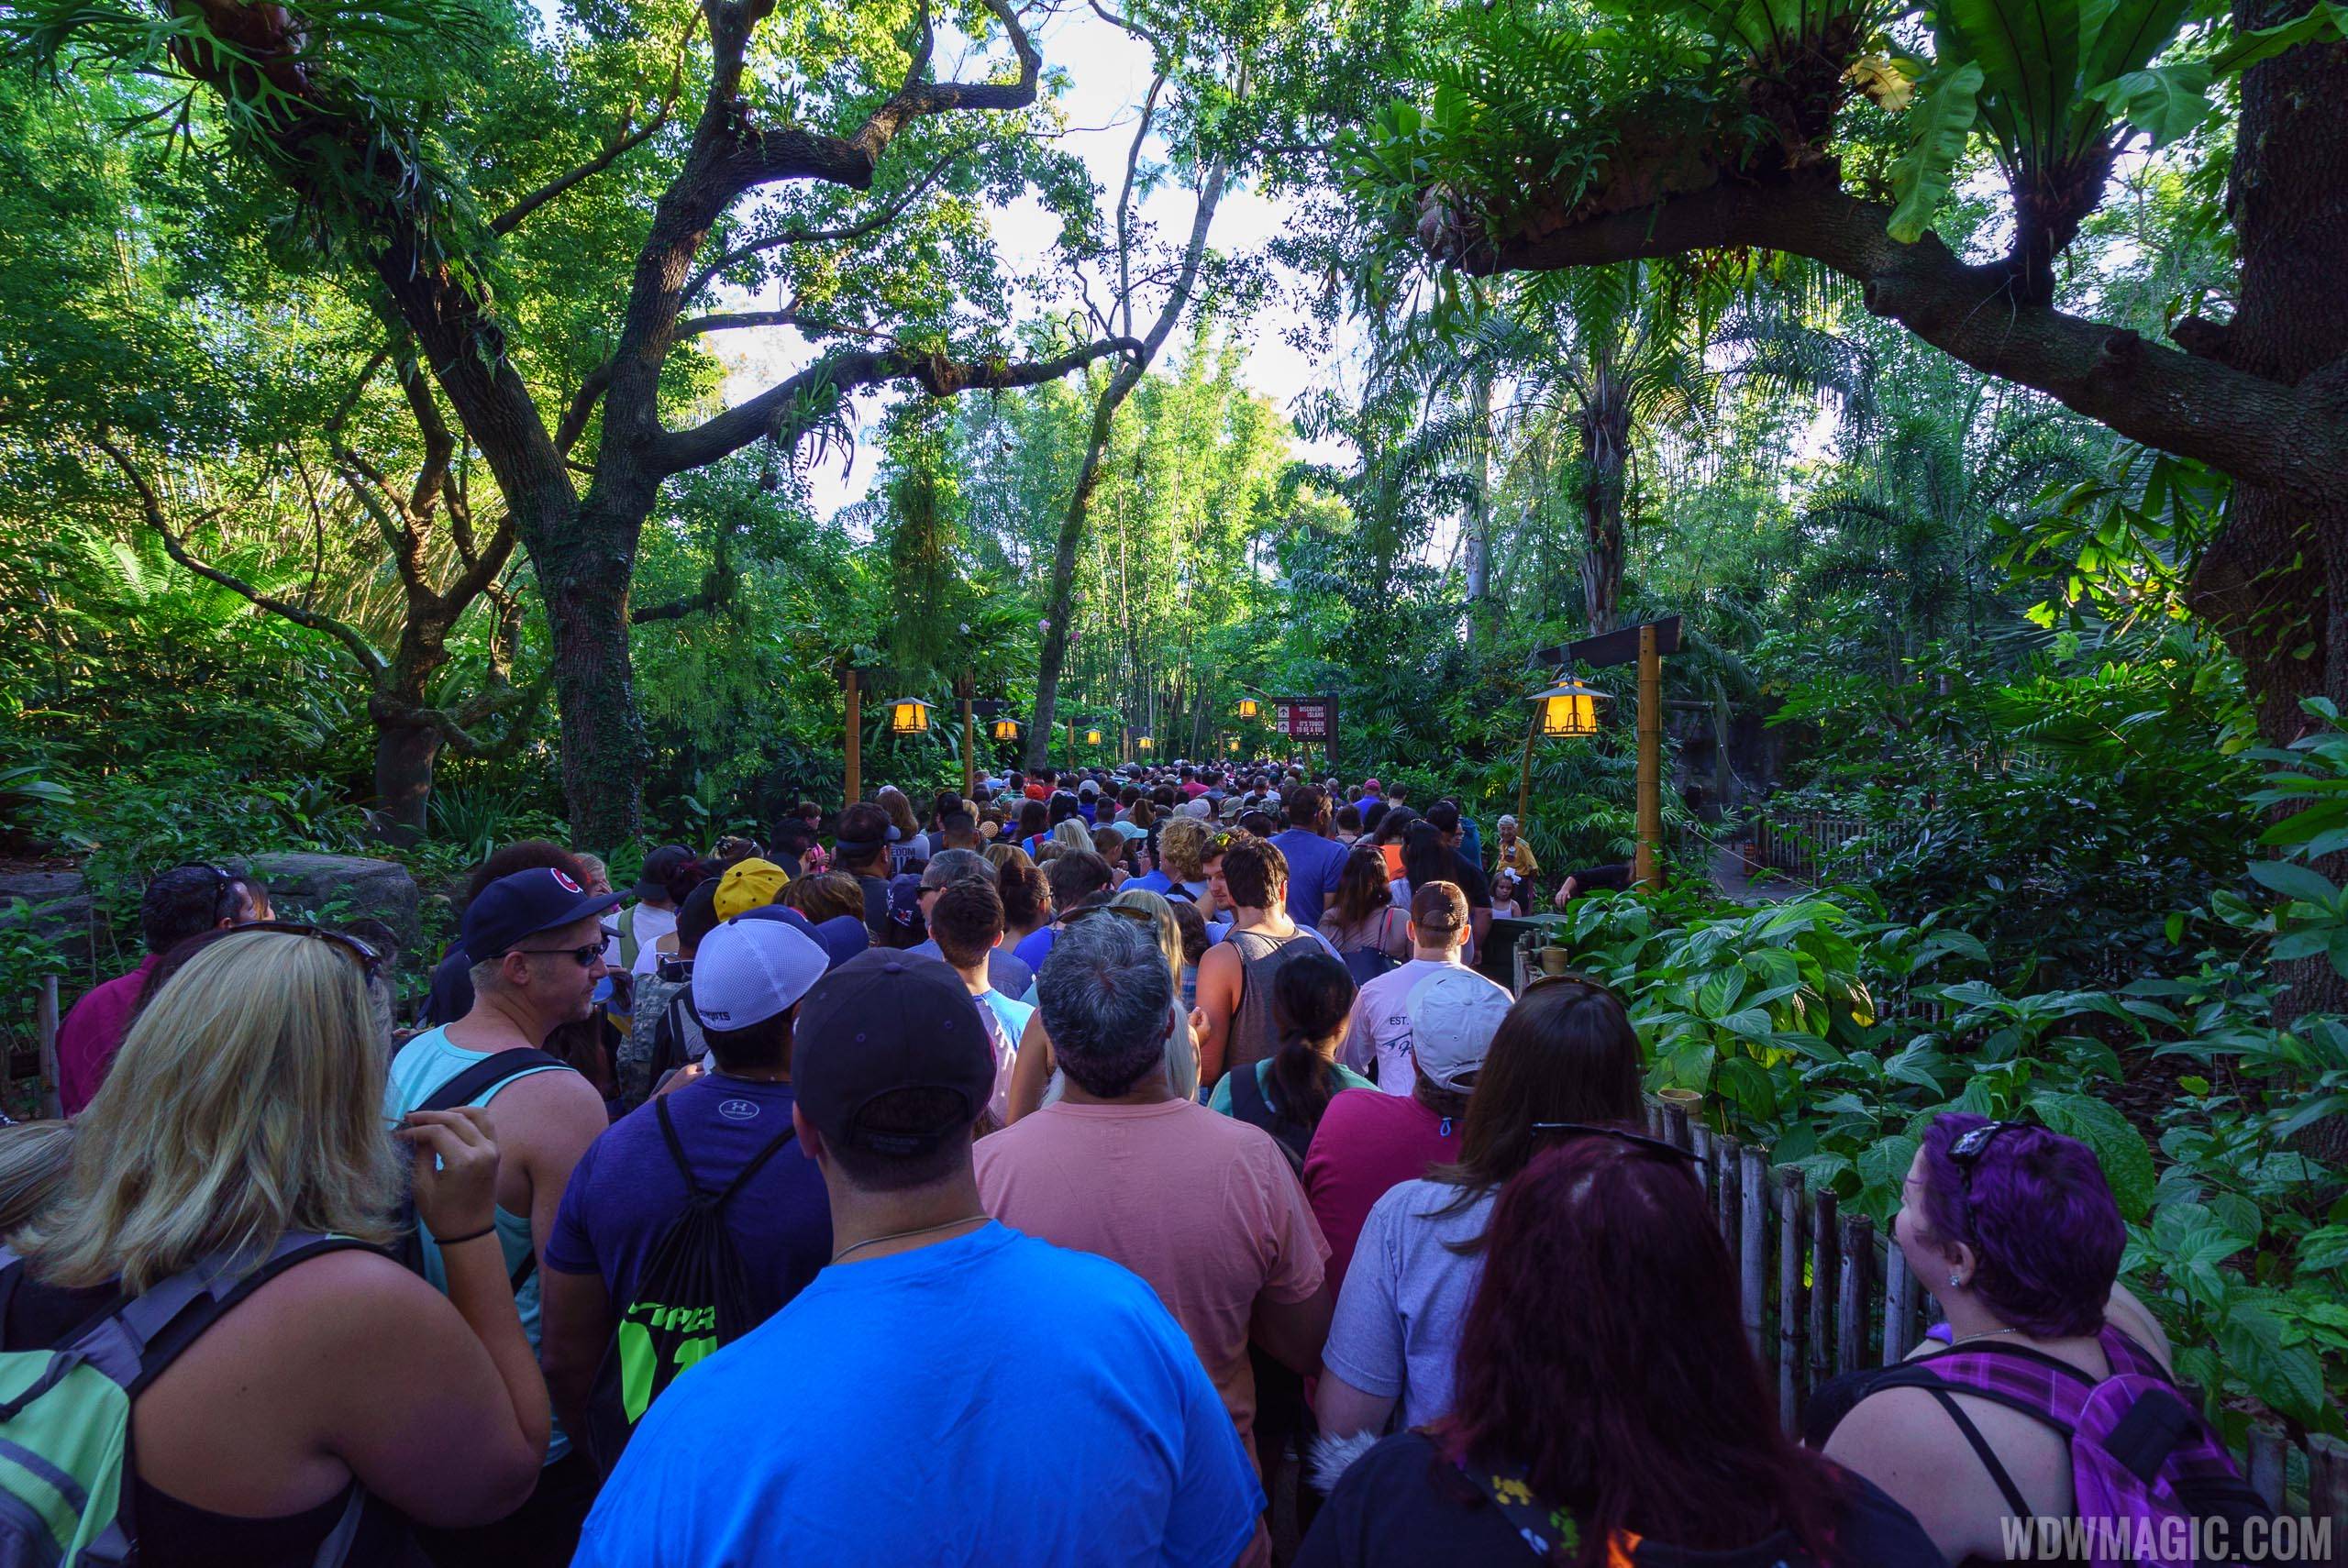 Guests in the Oasis waiting to enter Pandora